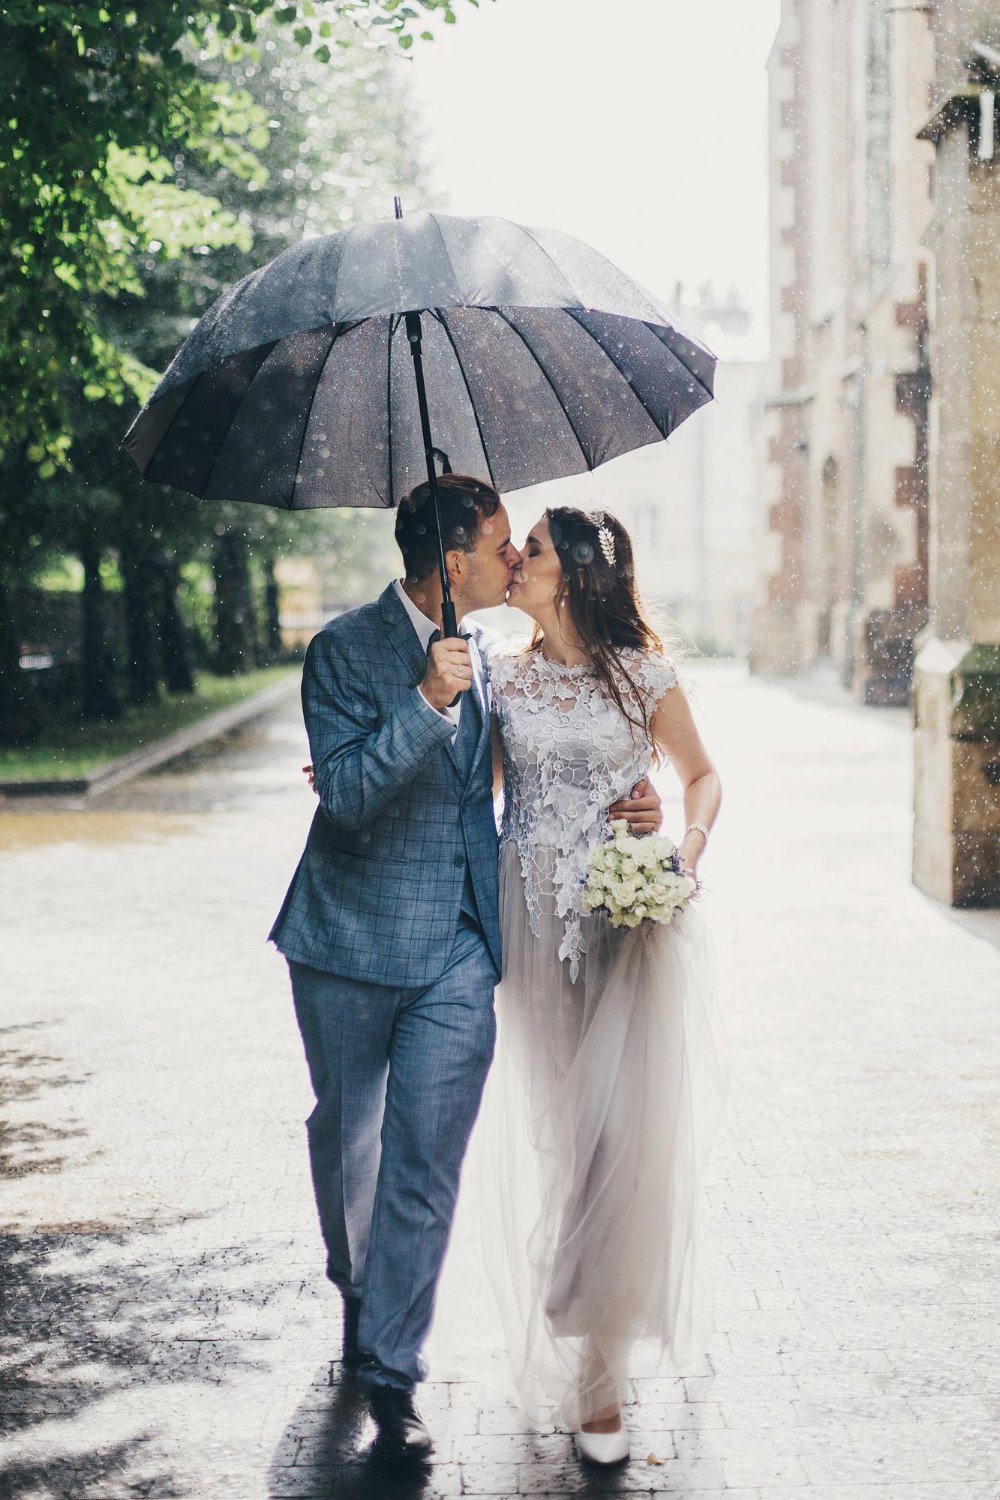 stylish bride and groom walking under umbrella and kissing on background of old church in rain